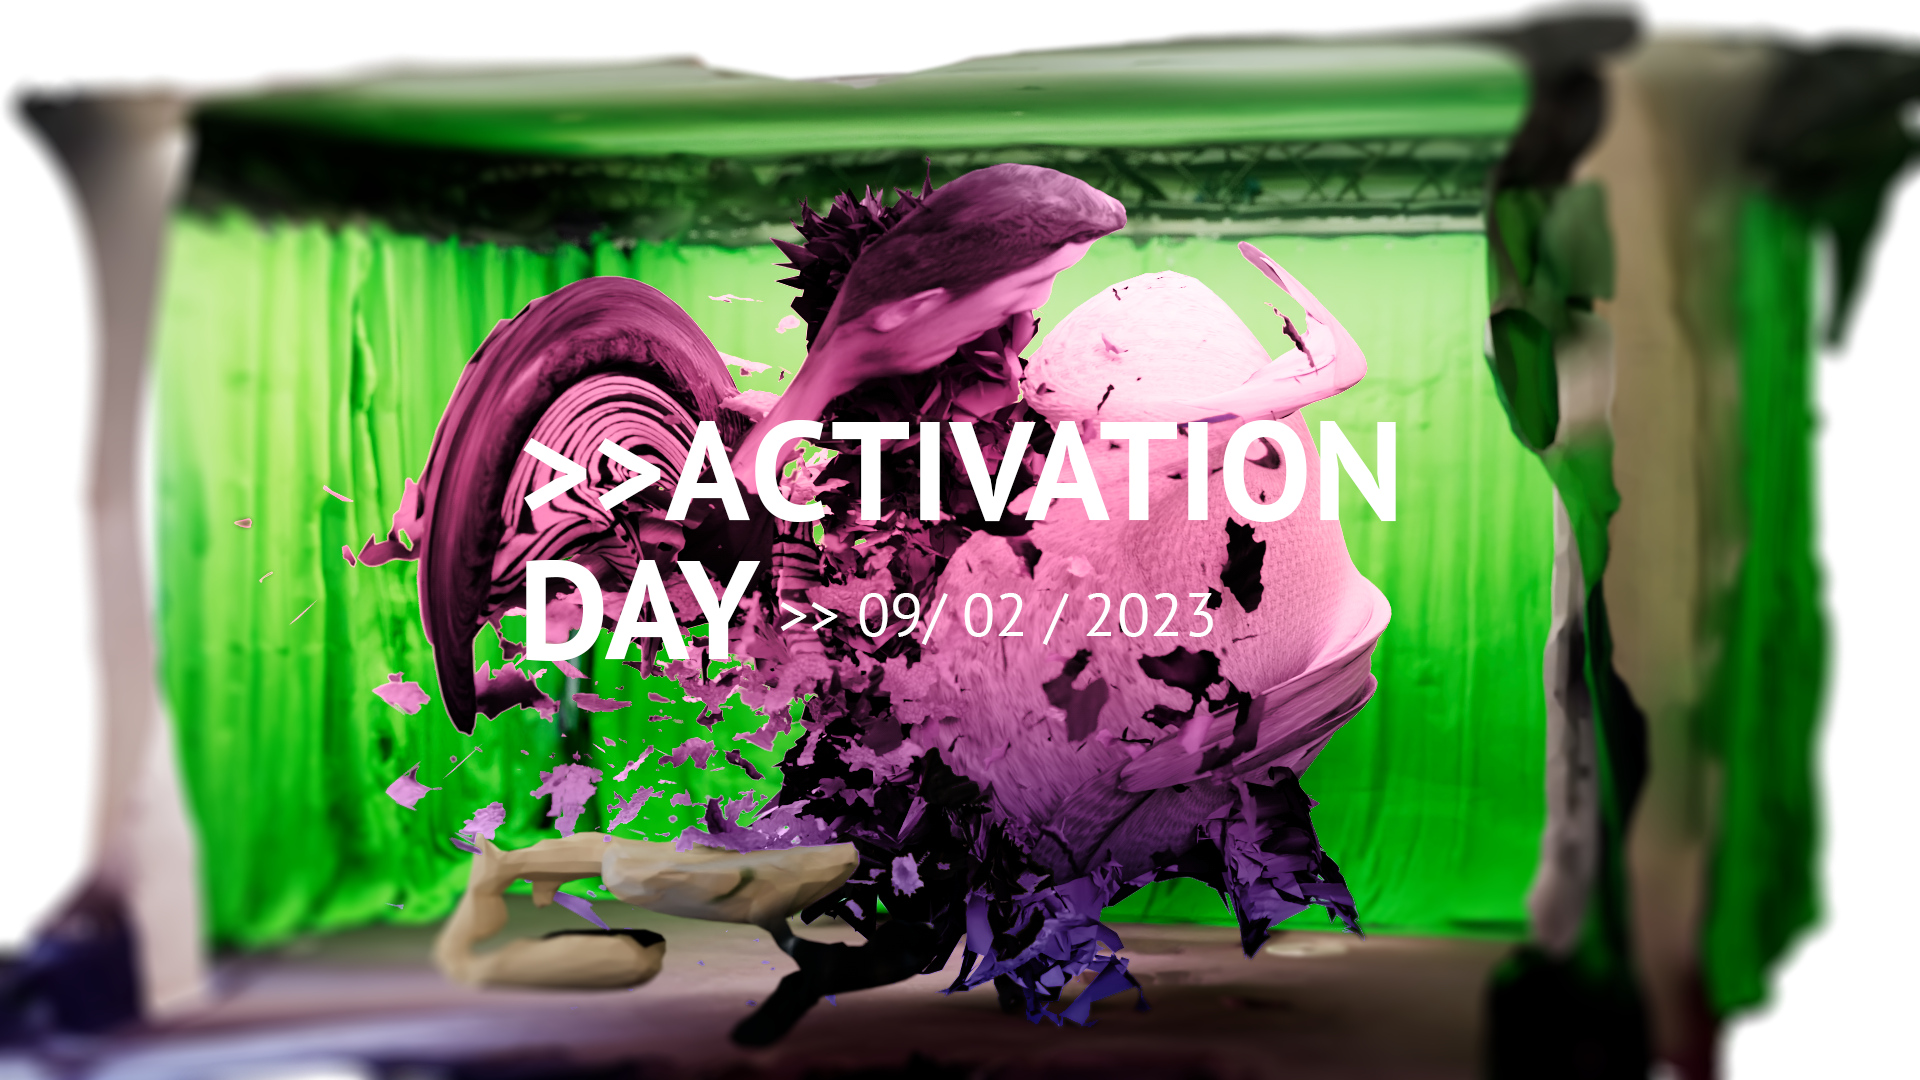 ACTIVATION DAY